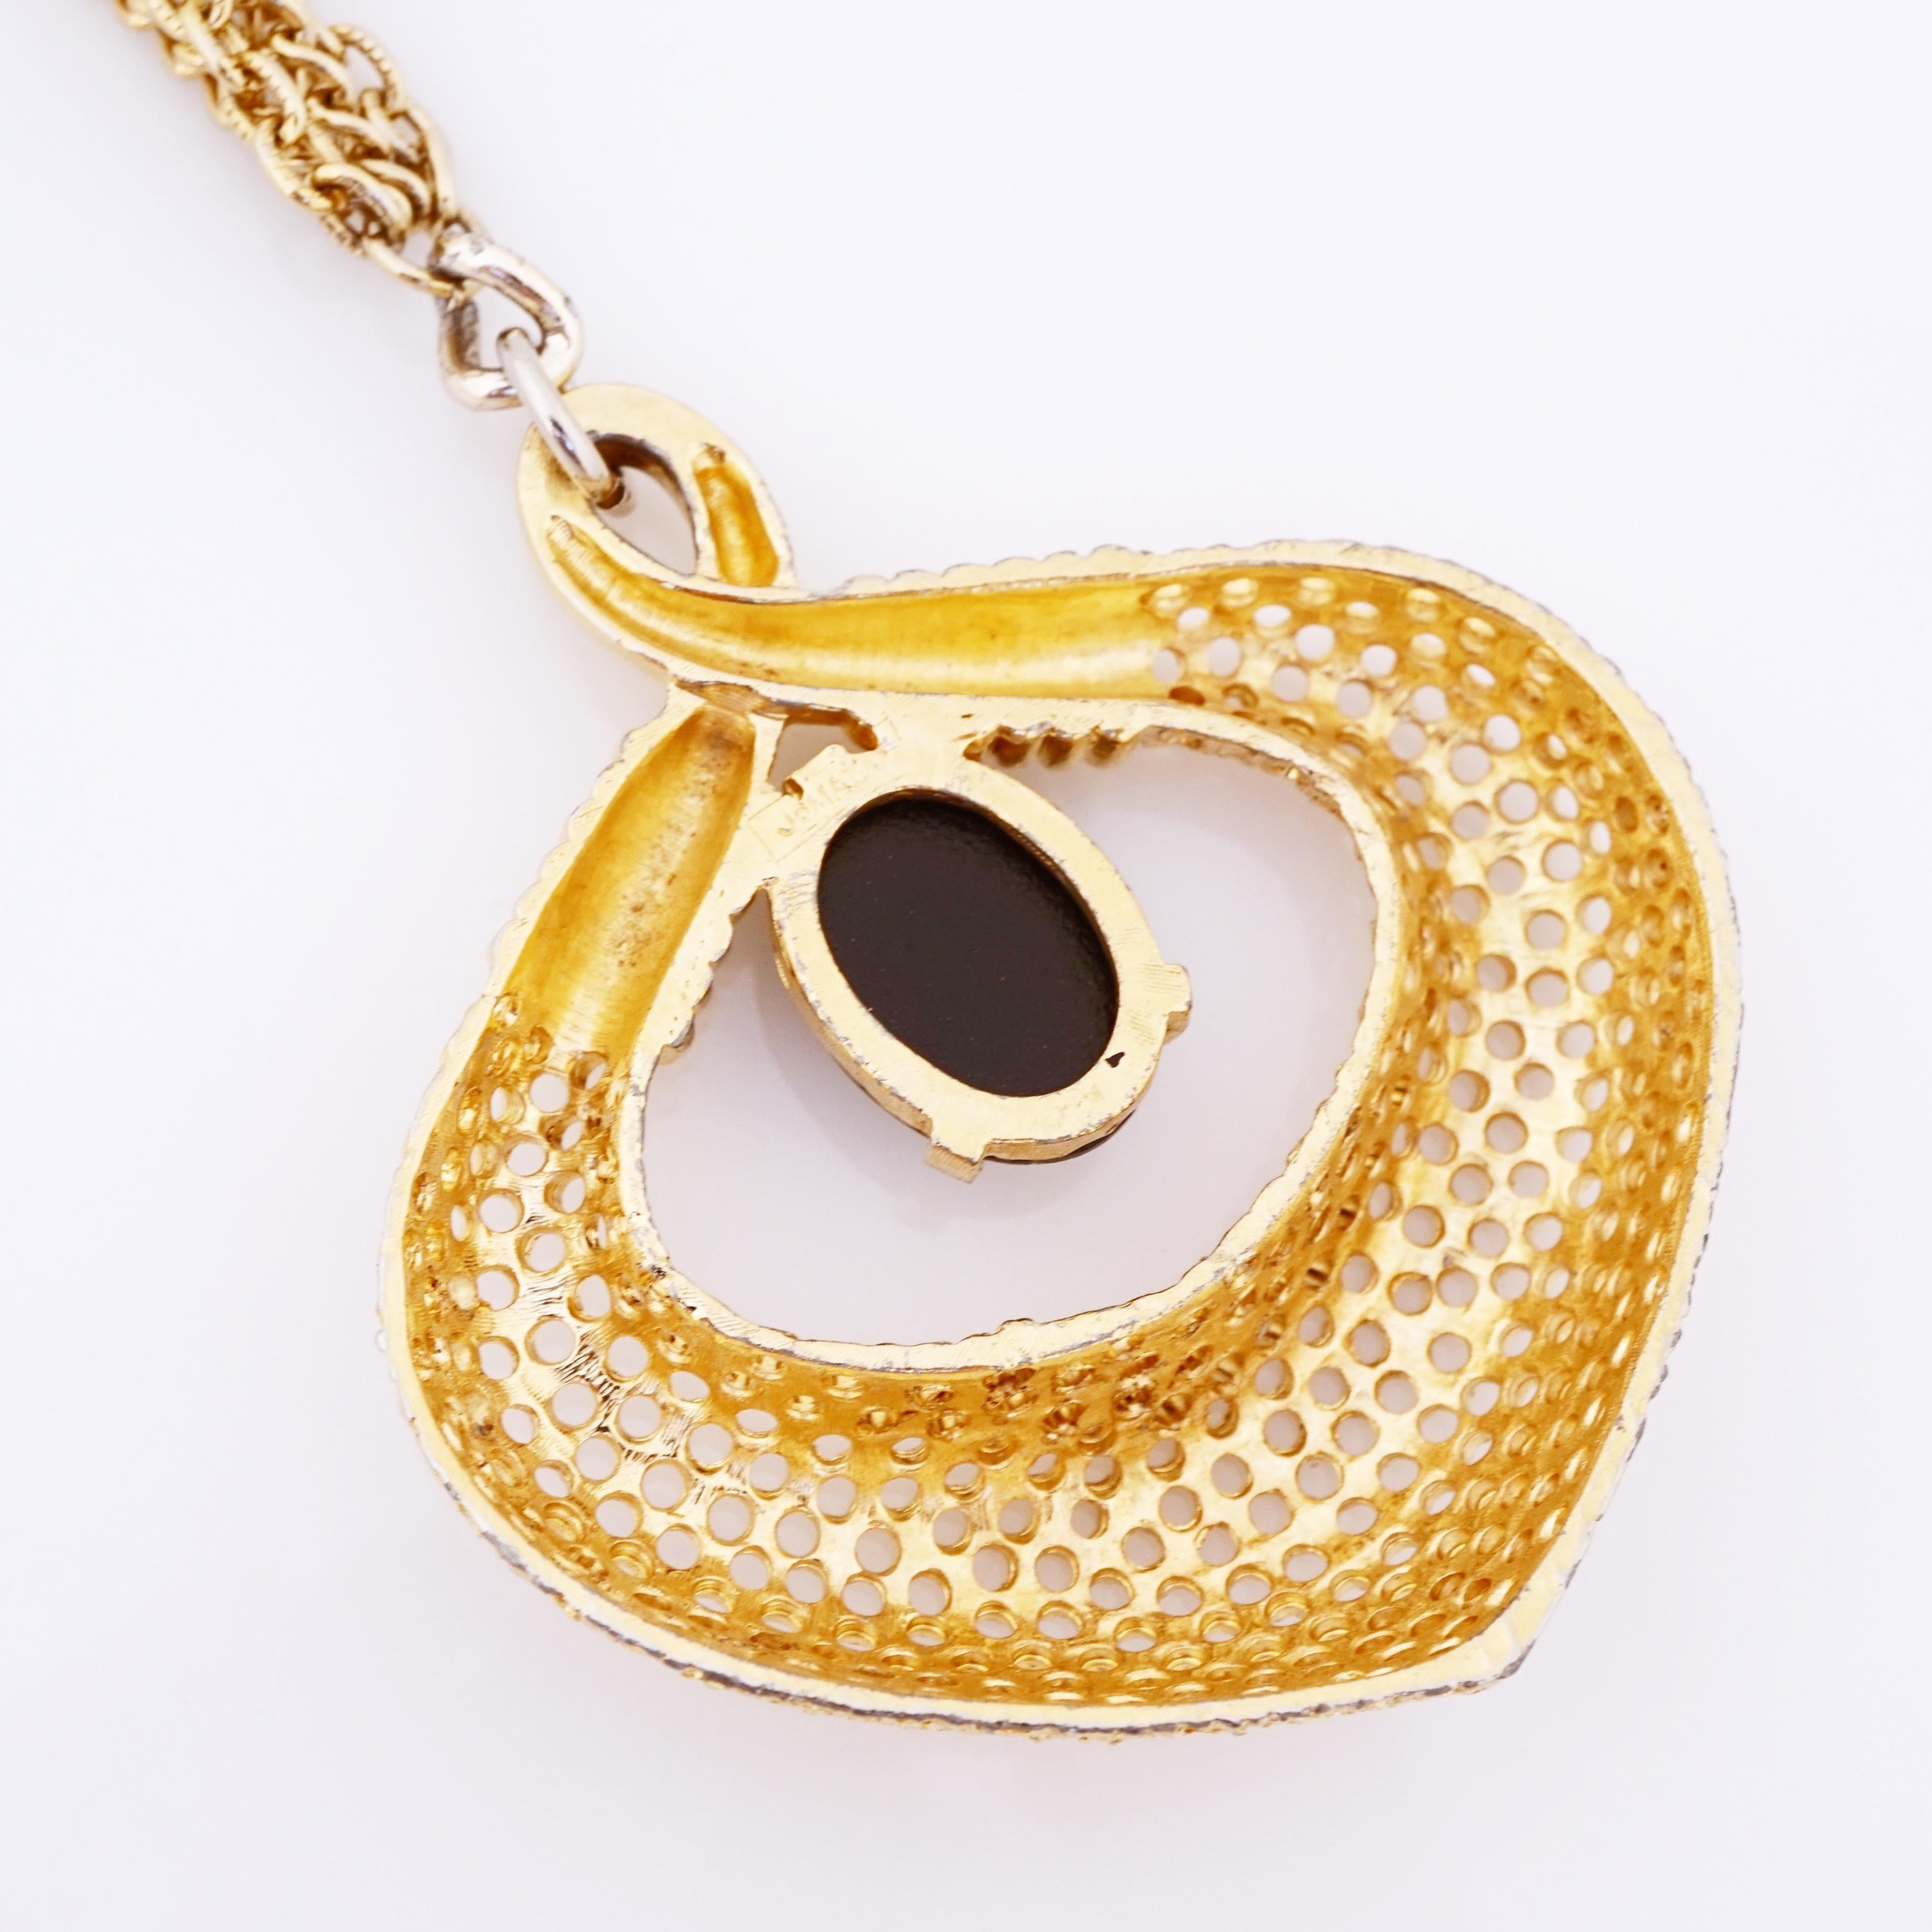 Gold Mod Pendant Statement Necklace With Onyx Cabochon By Jomaz, 1970s In Good Condition For Sale In McKinney, TX